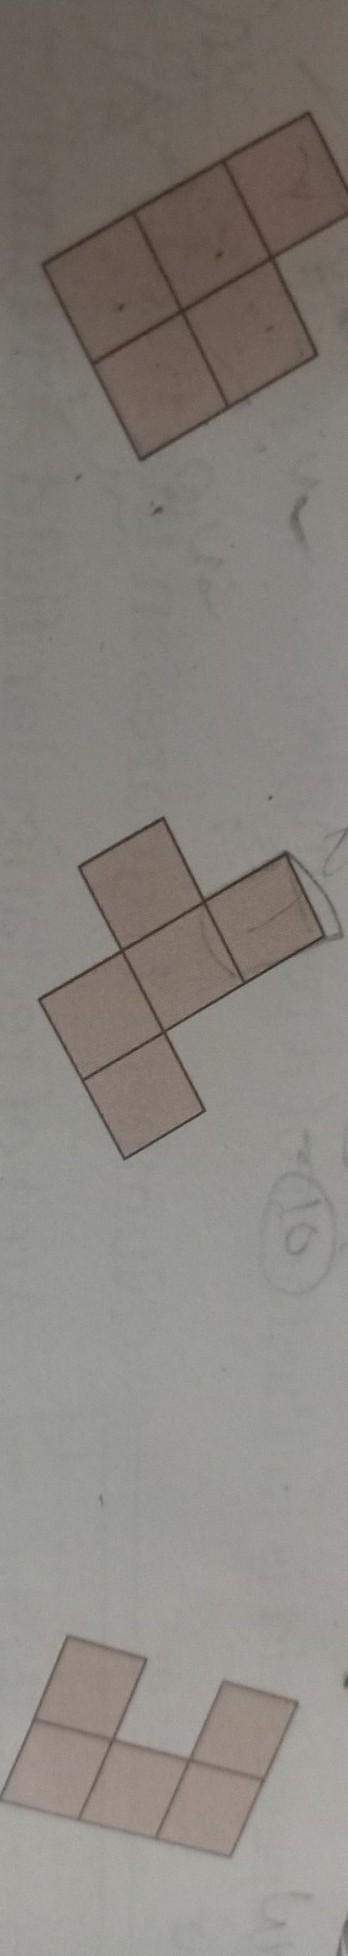 Each figure below is made up of five 2cm squares .find the perimeter of each figure.